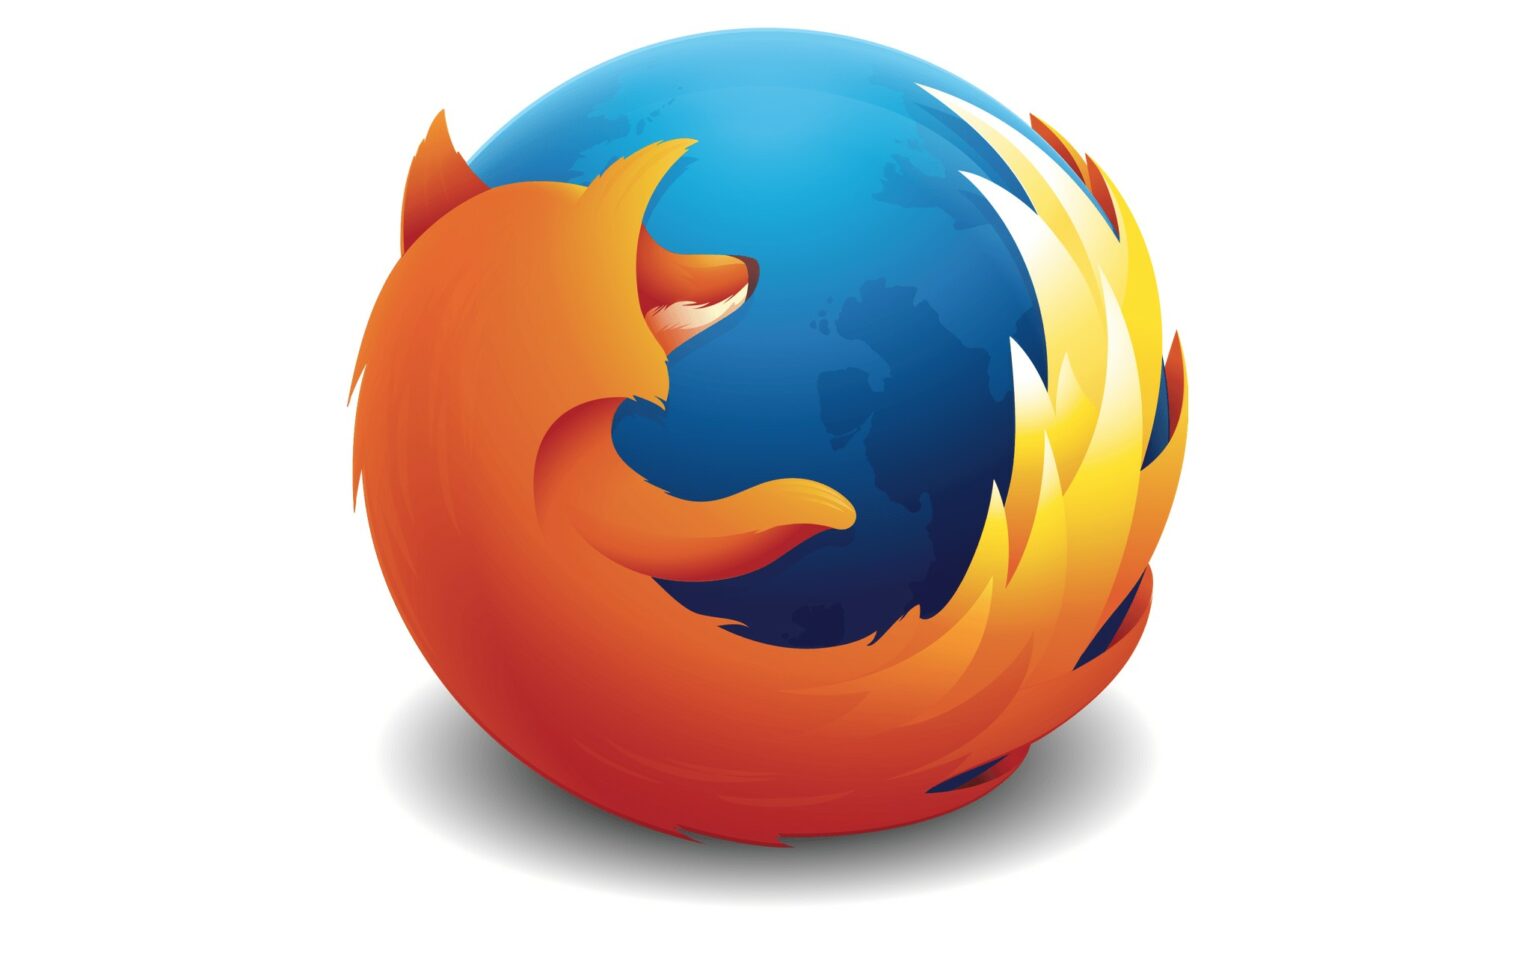 2021 MacBook Pro models should see a performance boost with the newest Firefox browser update.